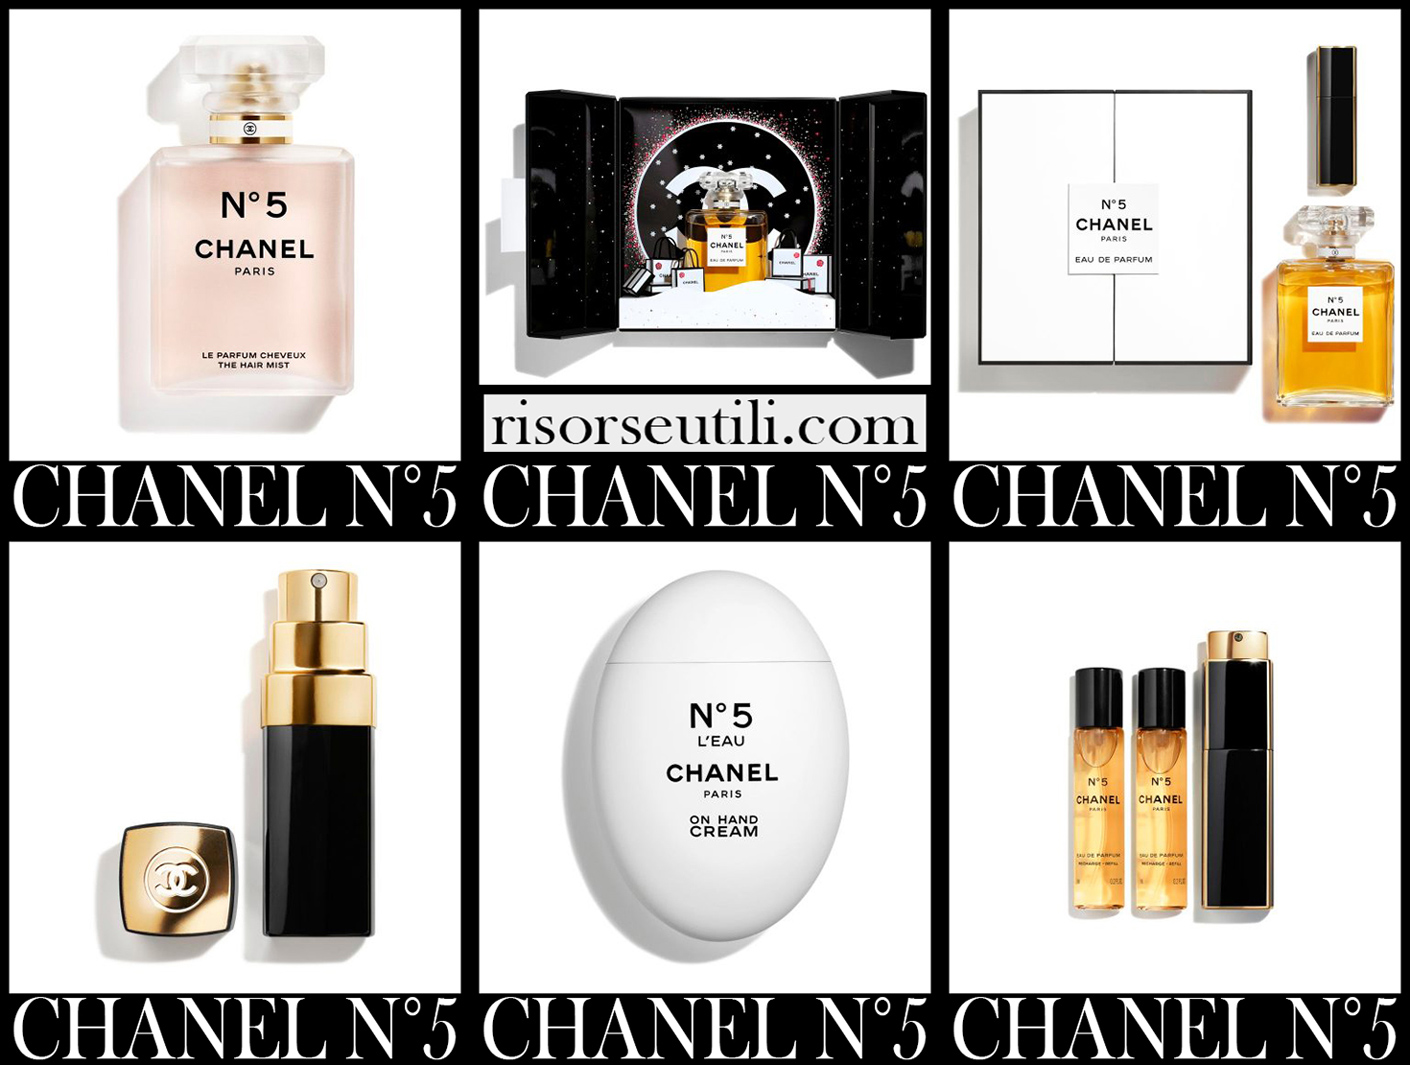 New arrivals Chanel N°5 perfumes 2021 gift ideas for women